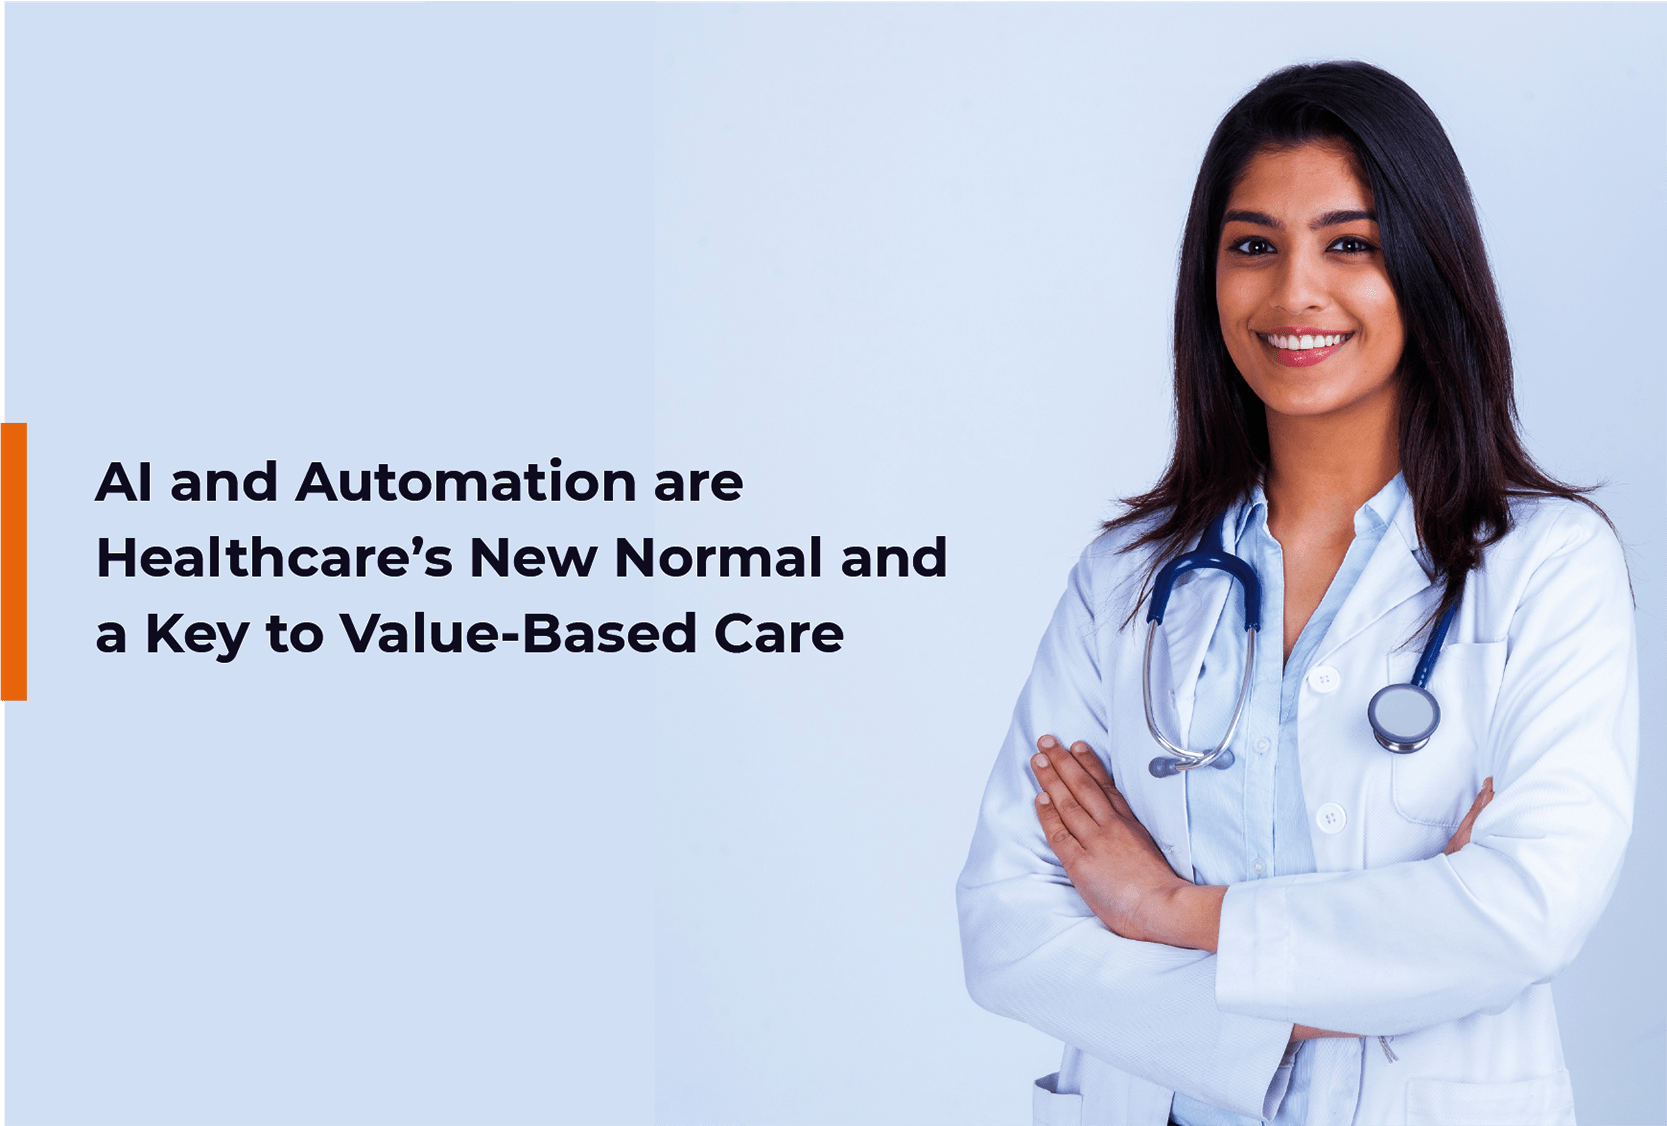 AI and Automation are Healthcare’s New Normal and a Key to Value-Based Care